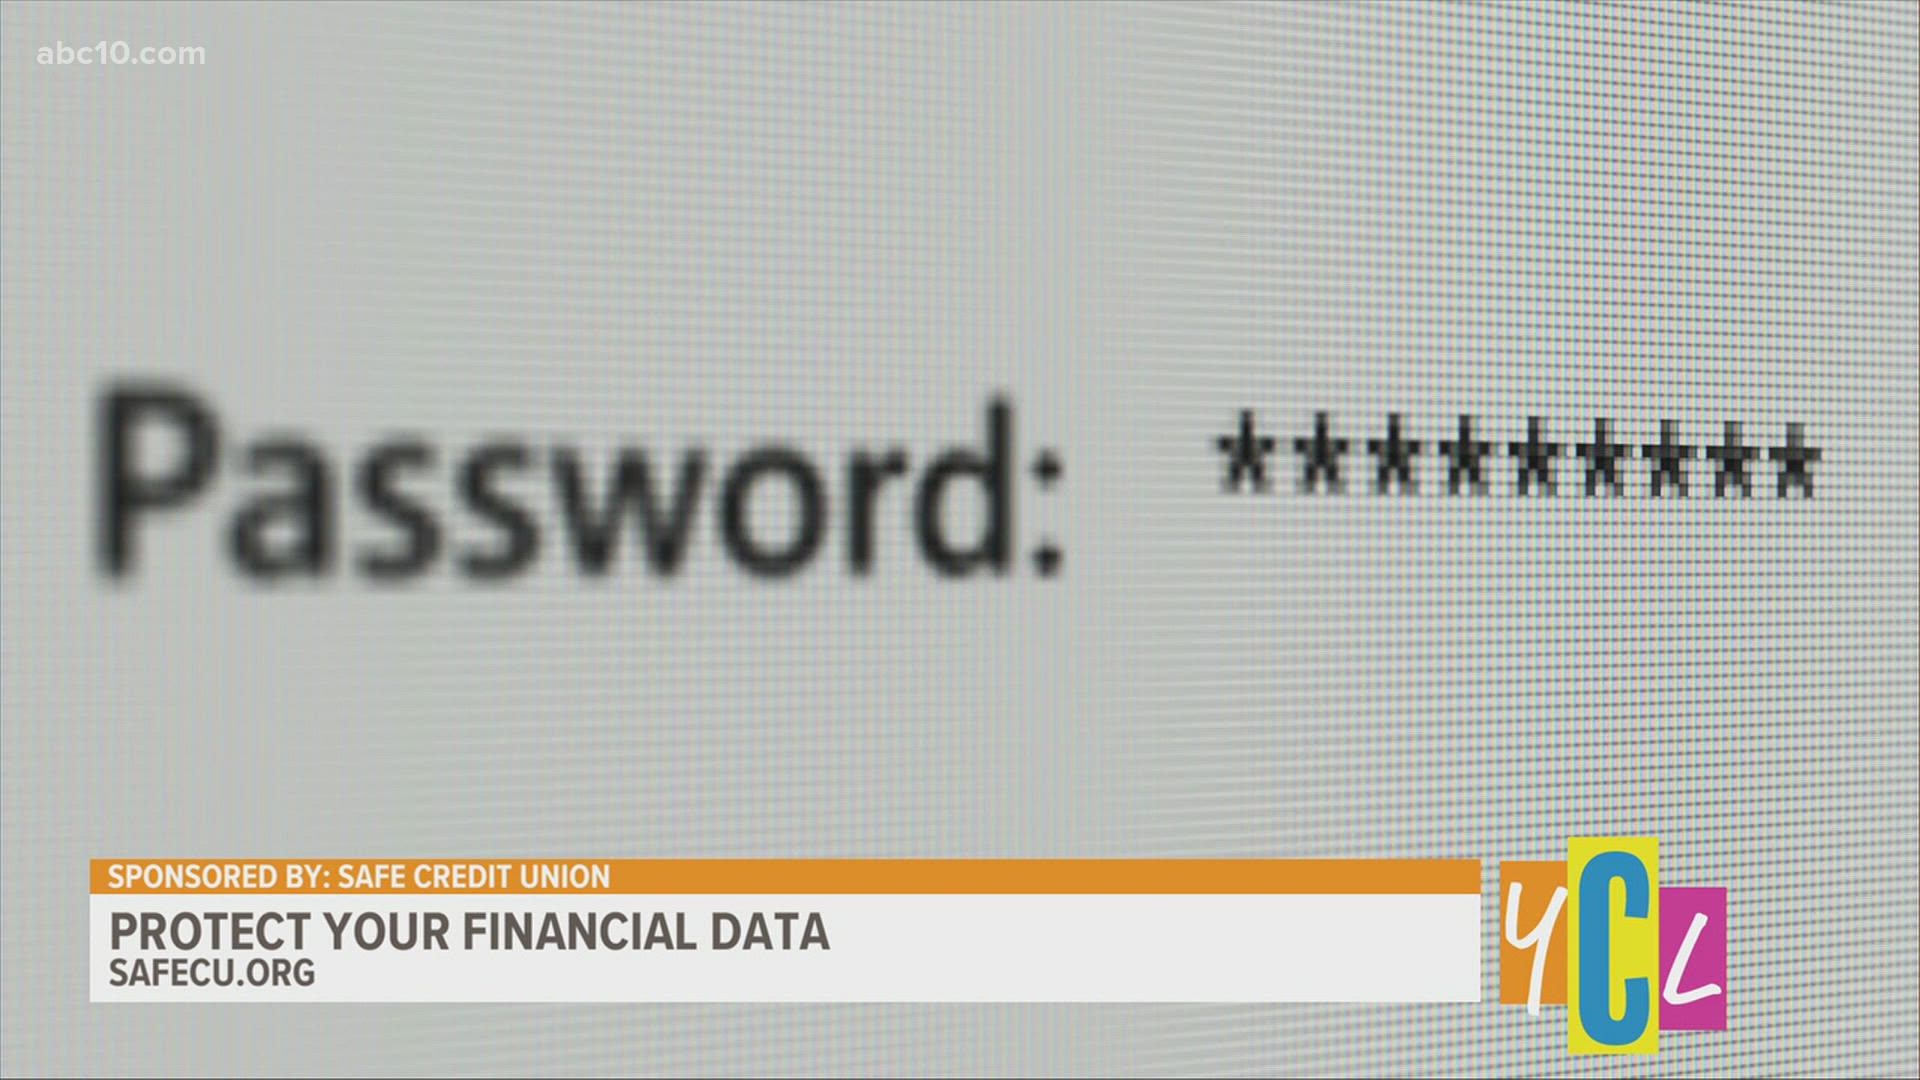 With hackers and spammers on the prowl, we’ll look at multiple ways to keep your financial date safe. 
This segment paid for by SAFE Credit Union.